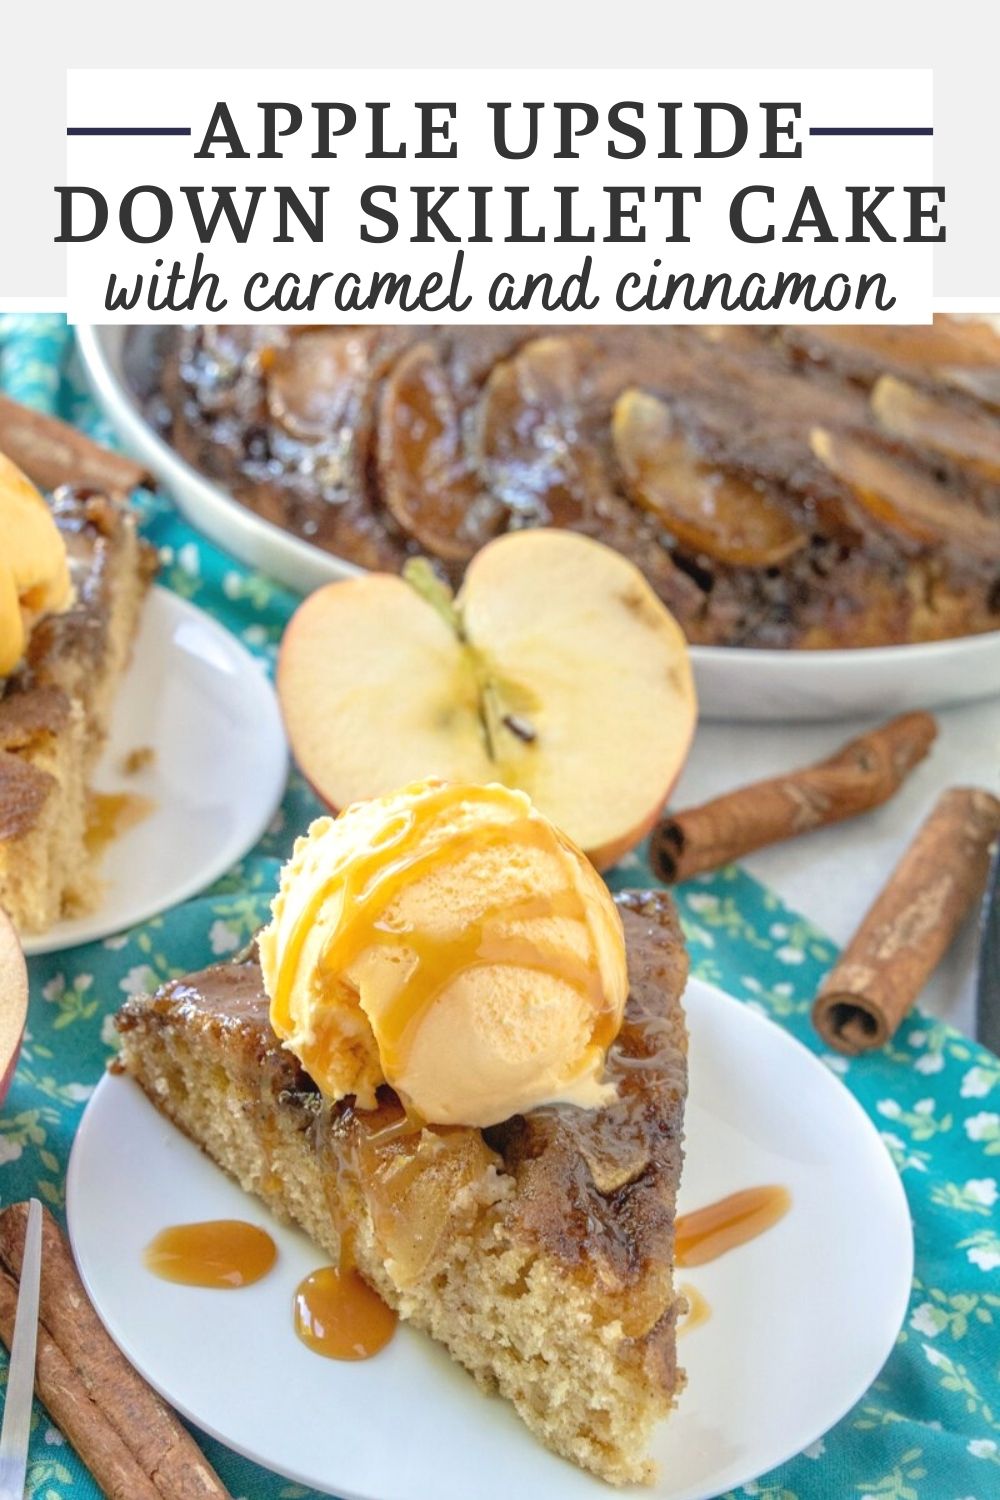 This caramel apple upside down skillet cake is the perfect way to get all of those cozy flavors and feelings together in one delicious dessert. It is part spice cake and part sticky caramel apple. It is great on its own, but of course a scoop of ice cream and drizzle of caramel make it even more decadent!